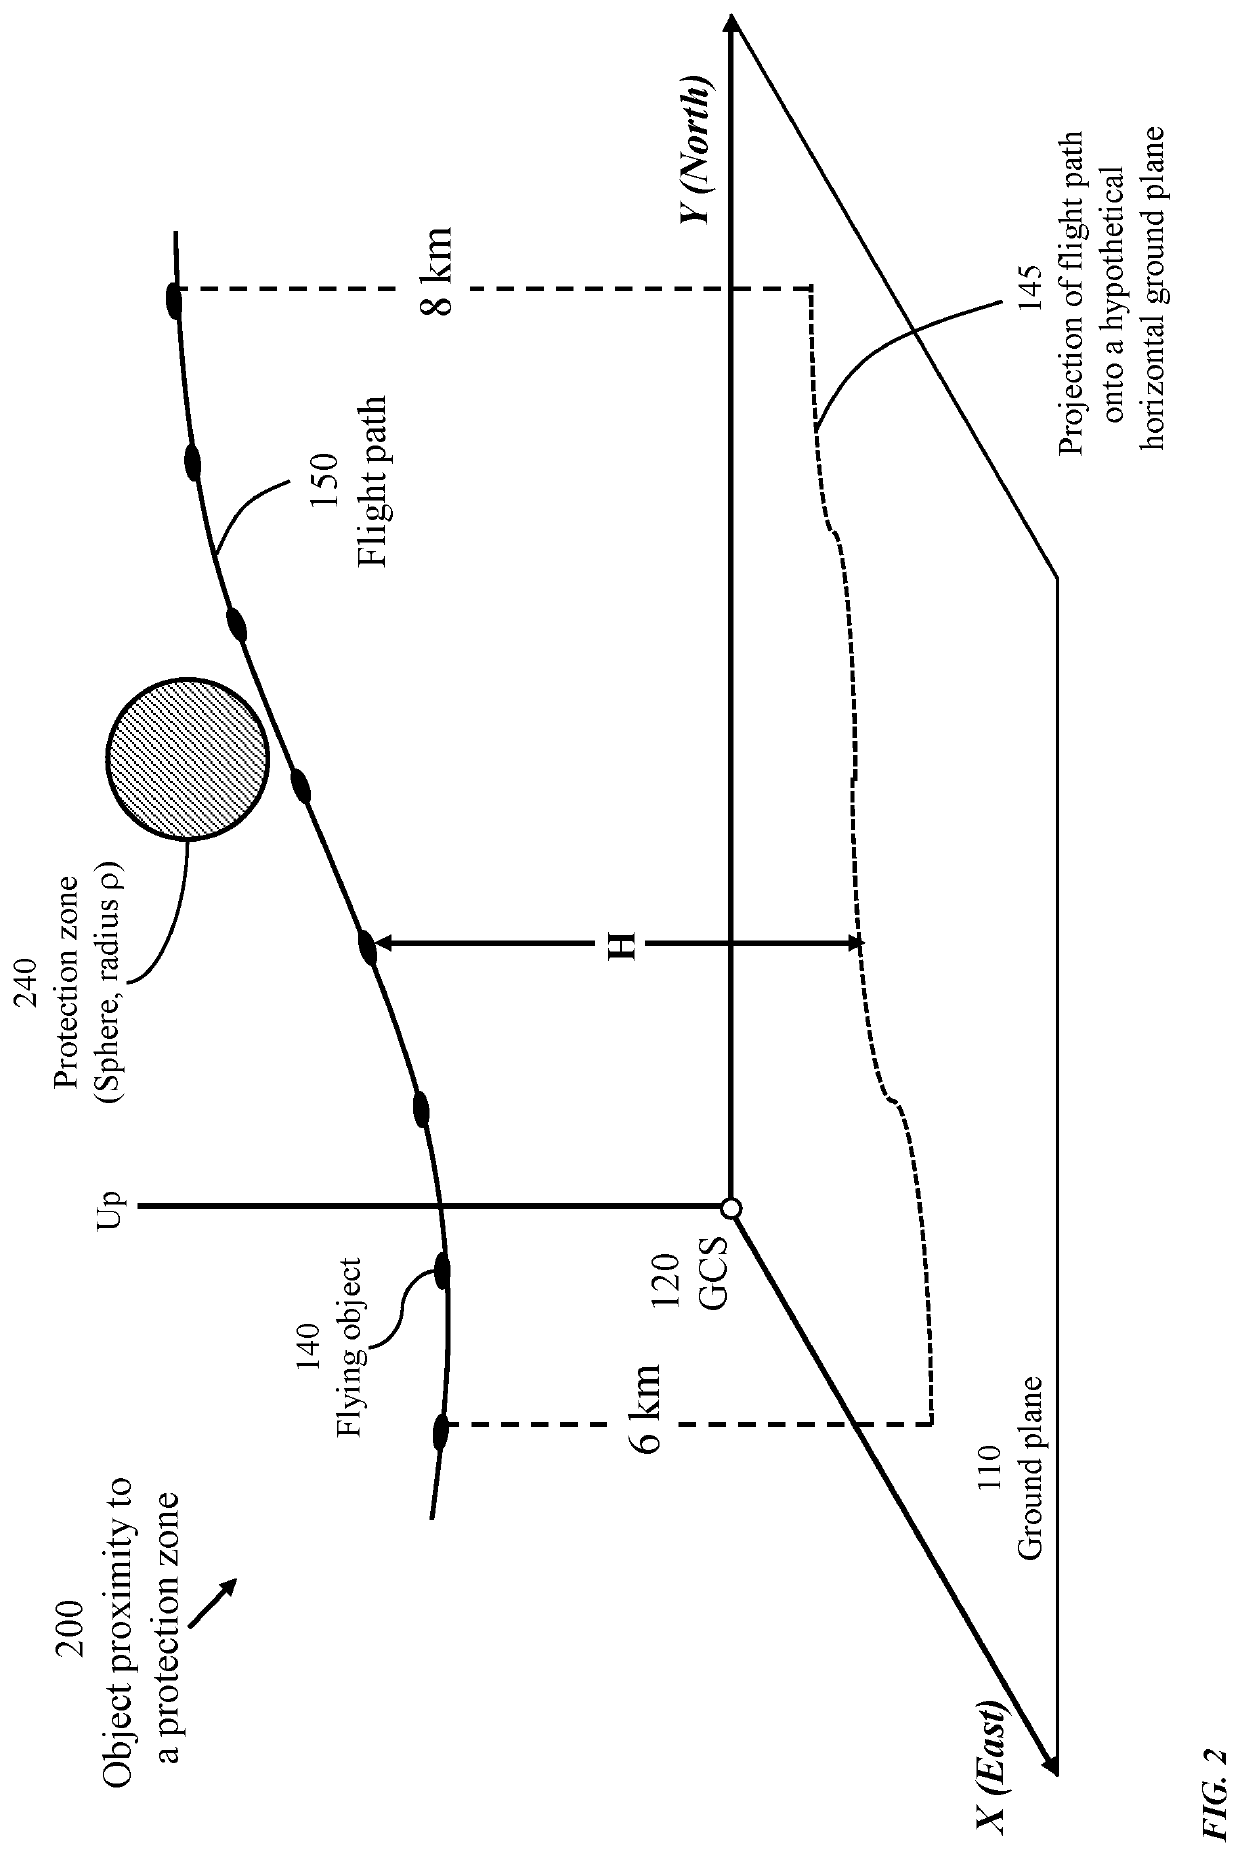 Method and apparatus for ensuring aviation safety in the presence of ownship aircrafts